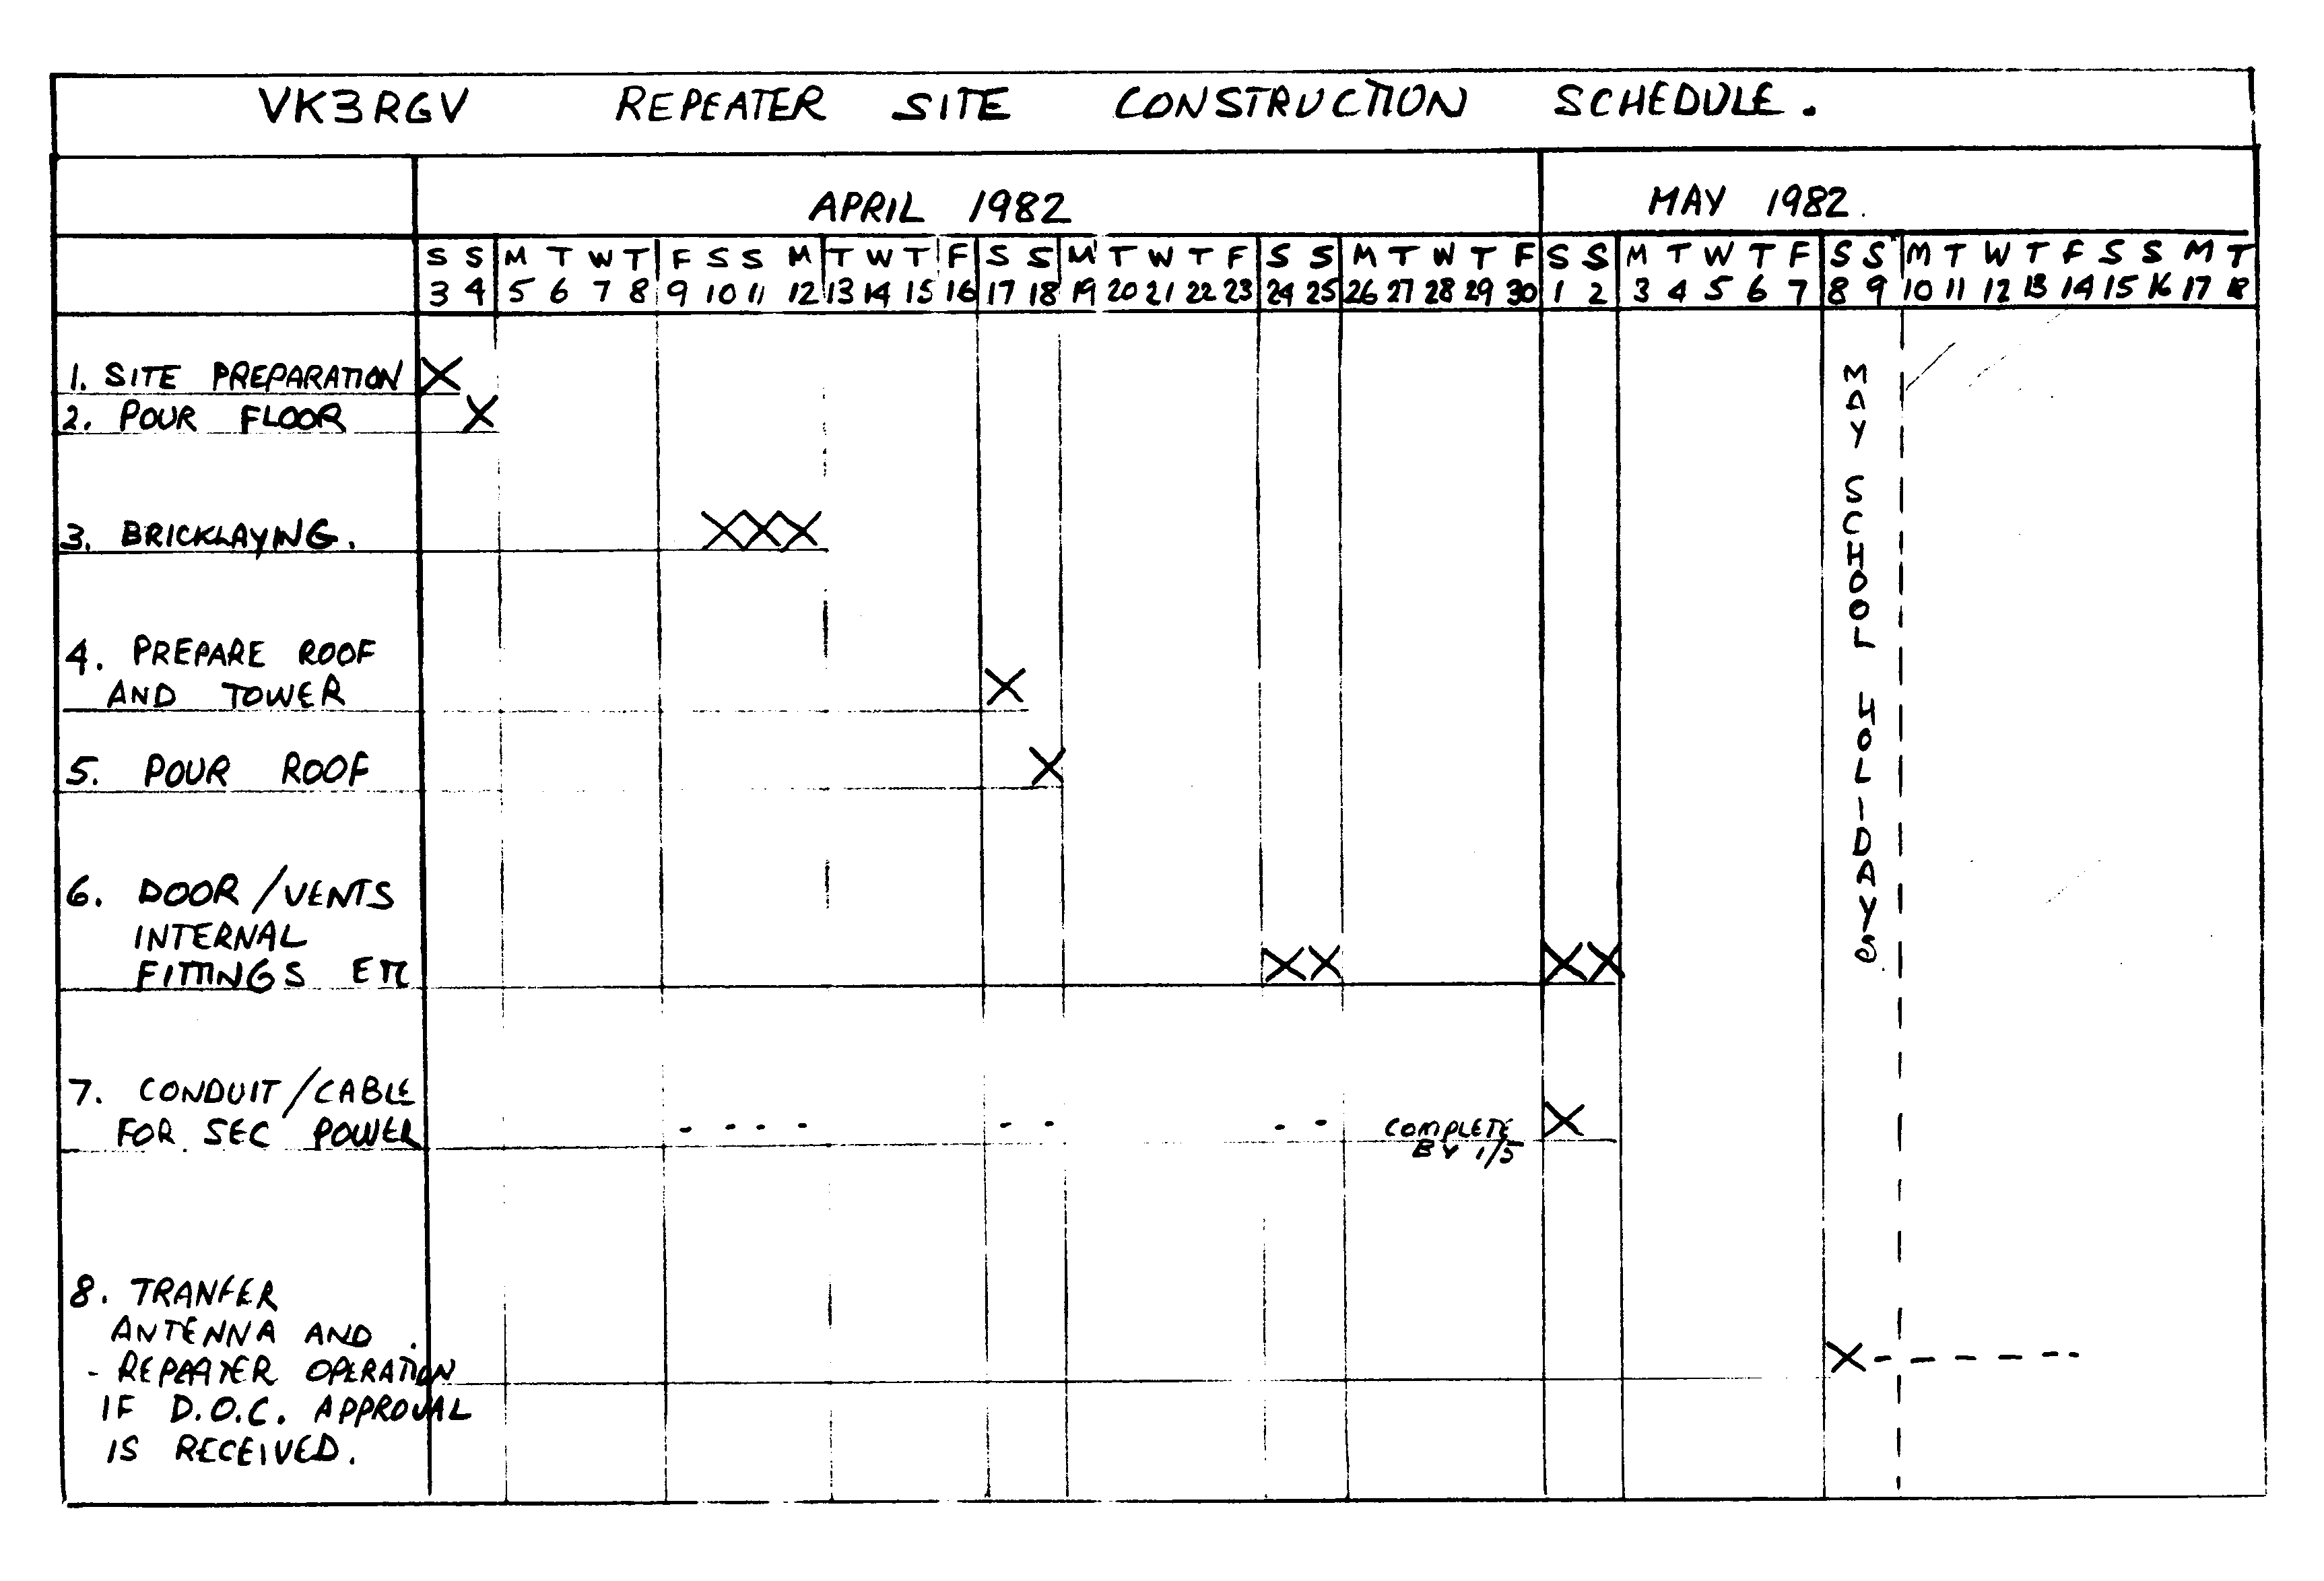 1982-04-01 RGV Repeater Group Site Construction Schedule YNV